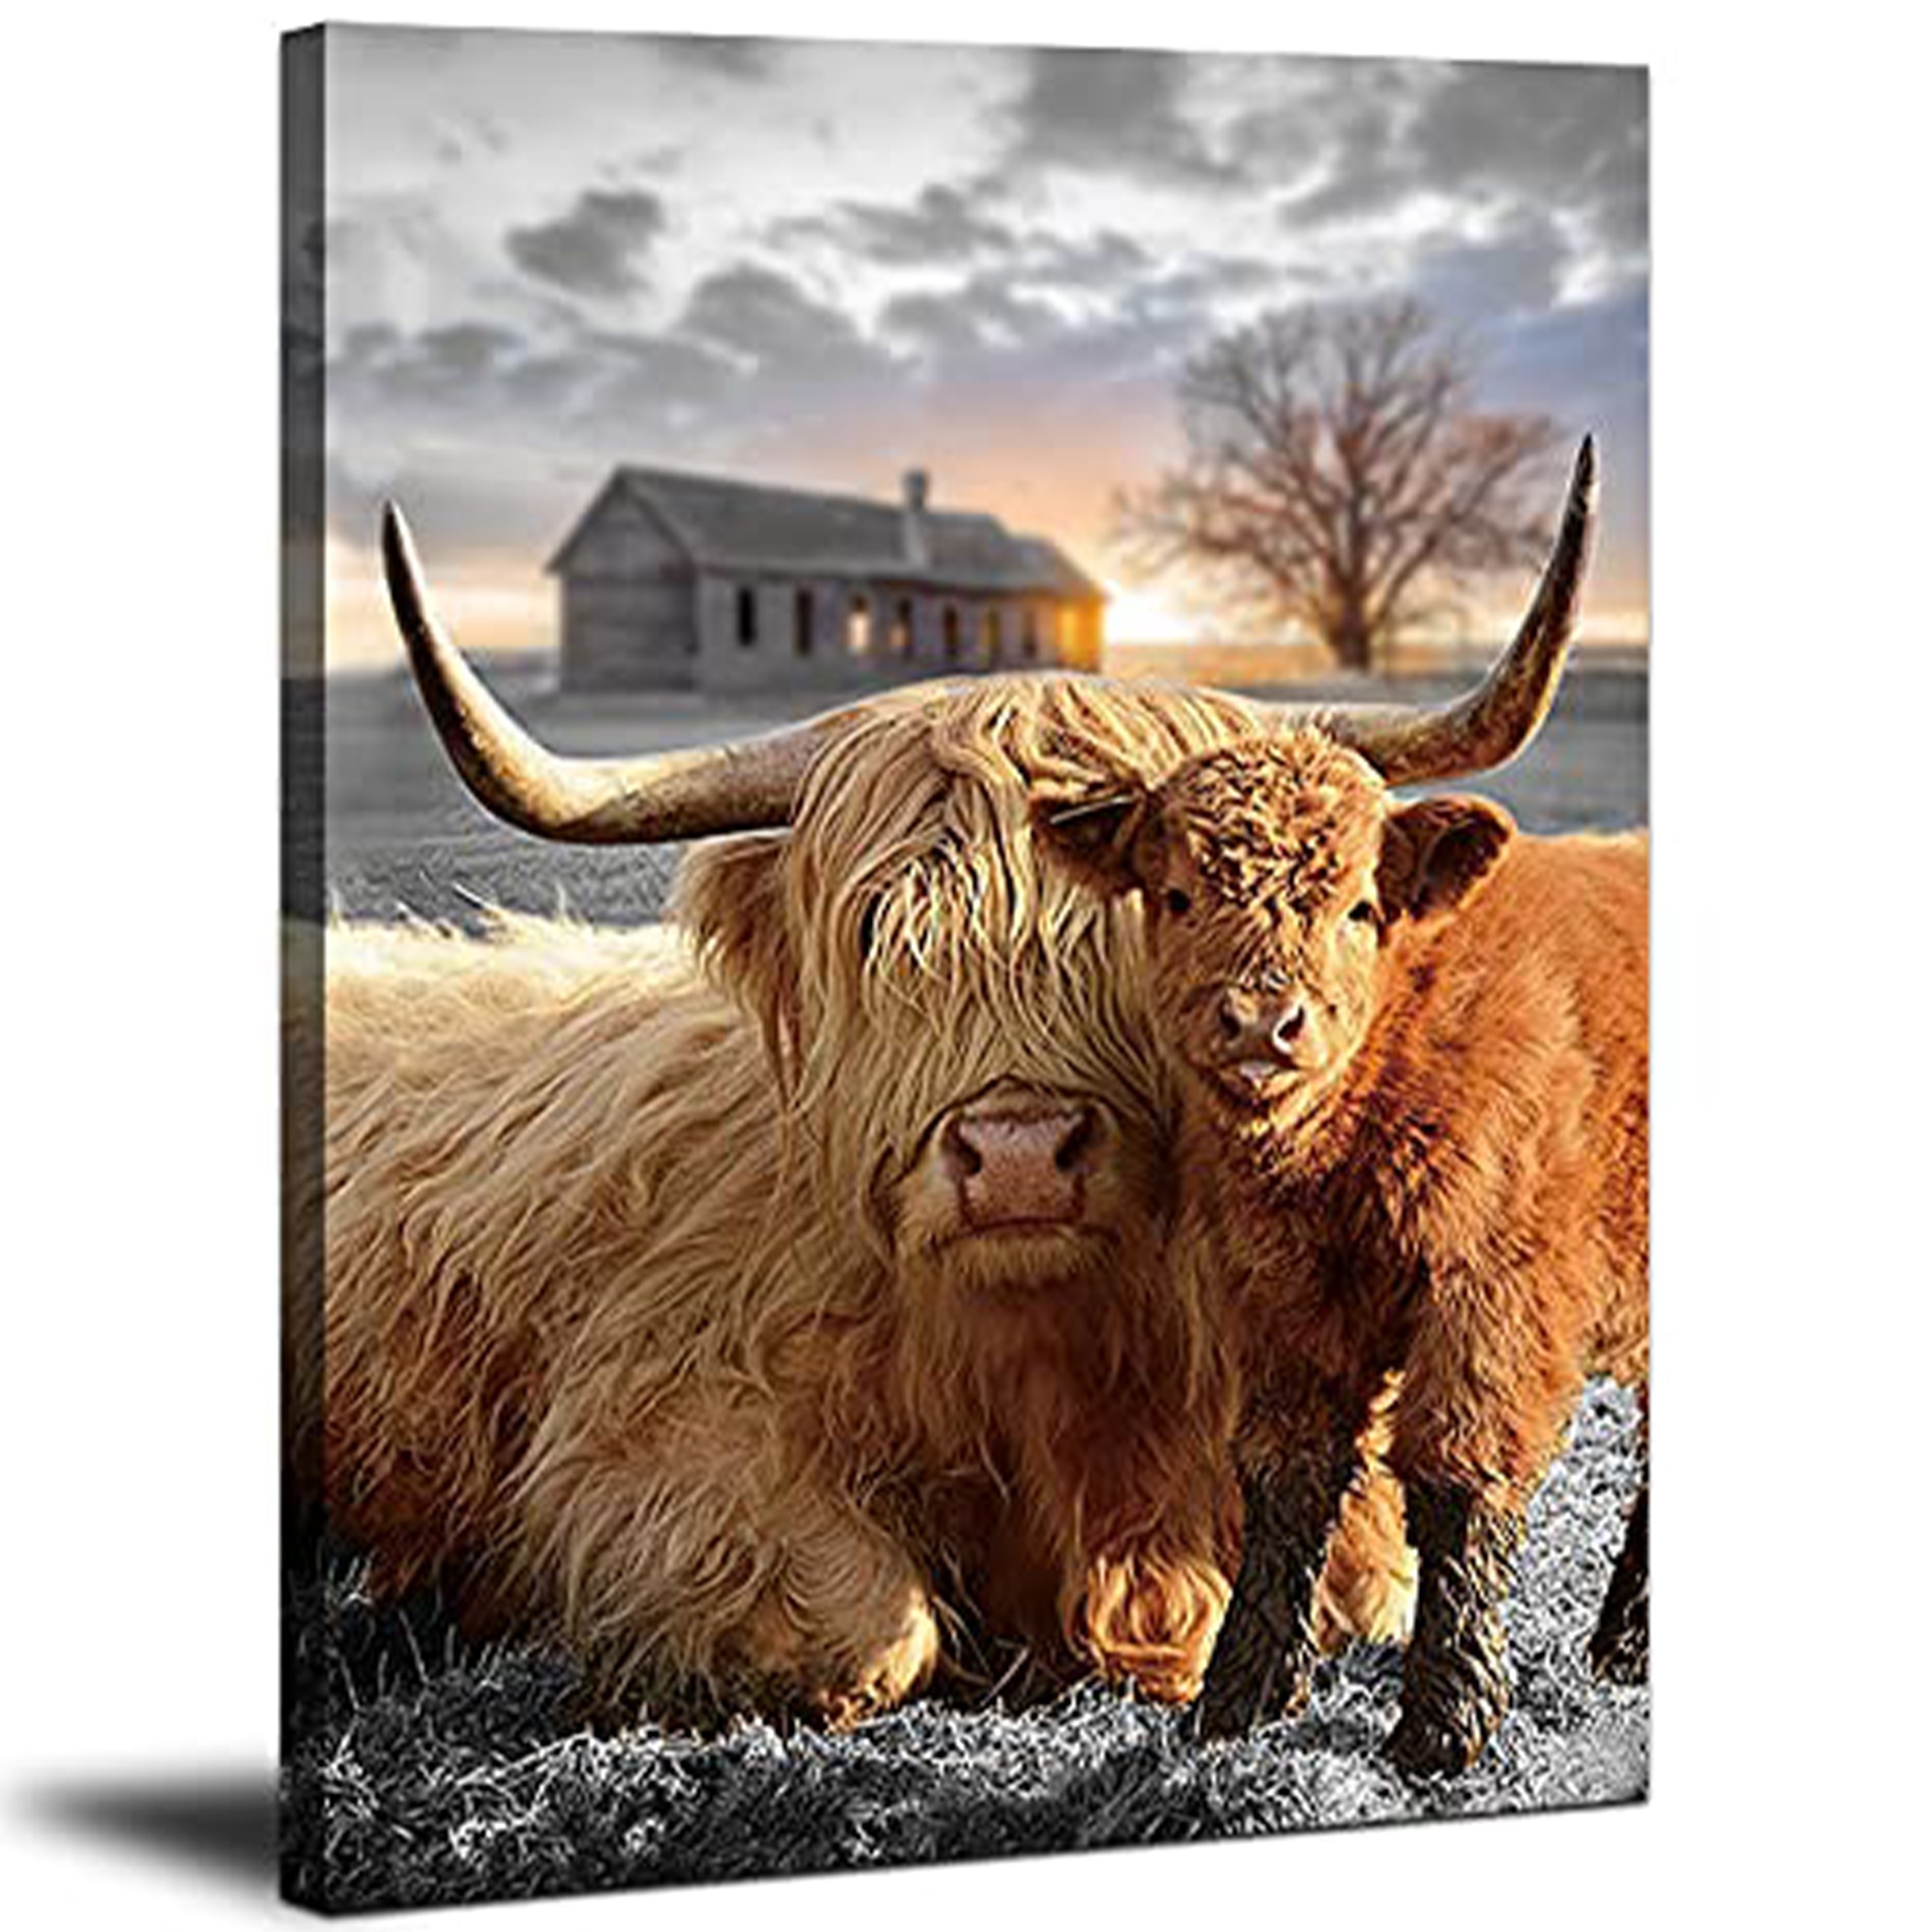 1pc 5D Diamond Painting Kits For Adults, Cow Cute Animal Diamond Painting  DIY Diamond Art Kit Round Full Drill Art Picture For Home Wall Decor,20x20cm